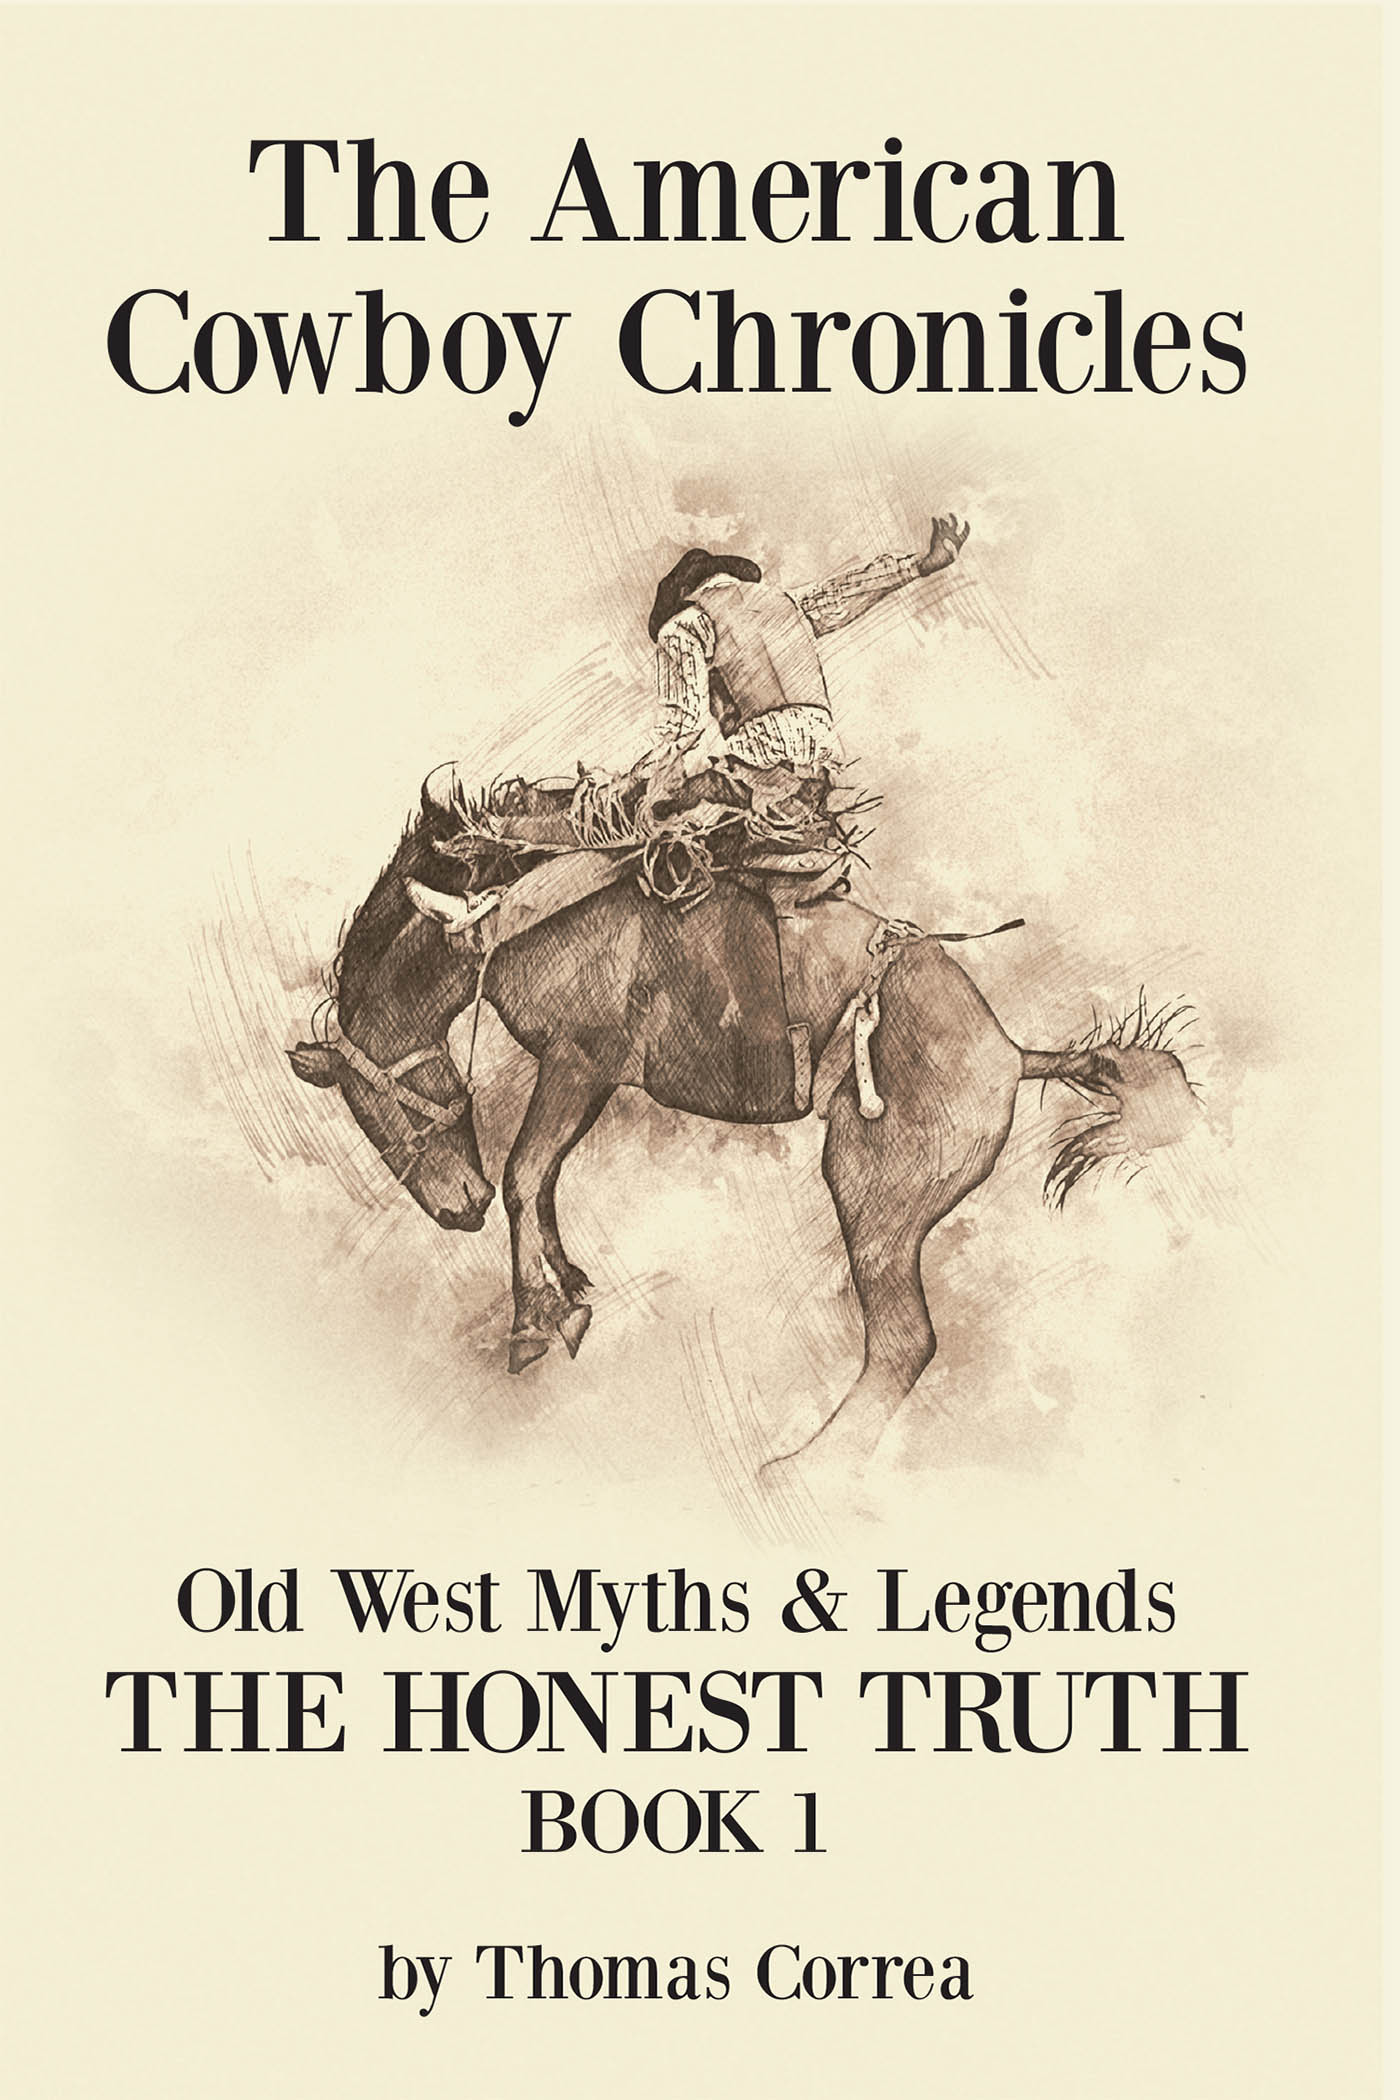 The American Cowboy Chronicles Old West Myths & Legends Cover Image